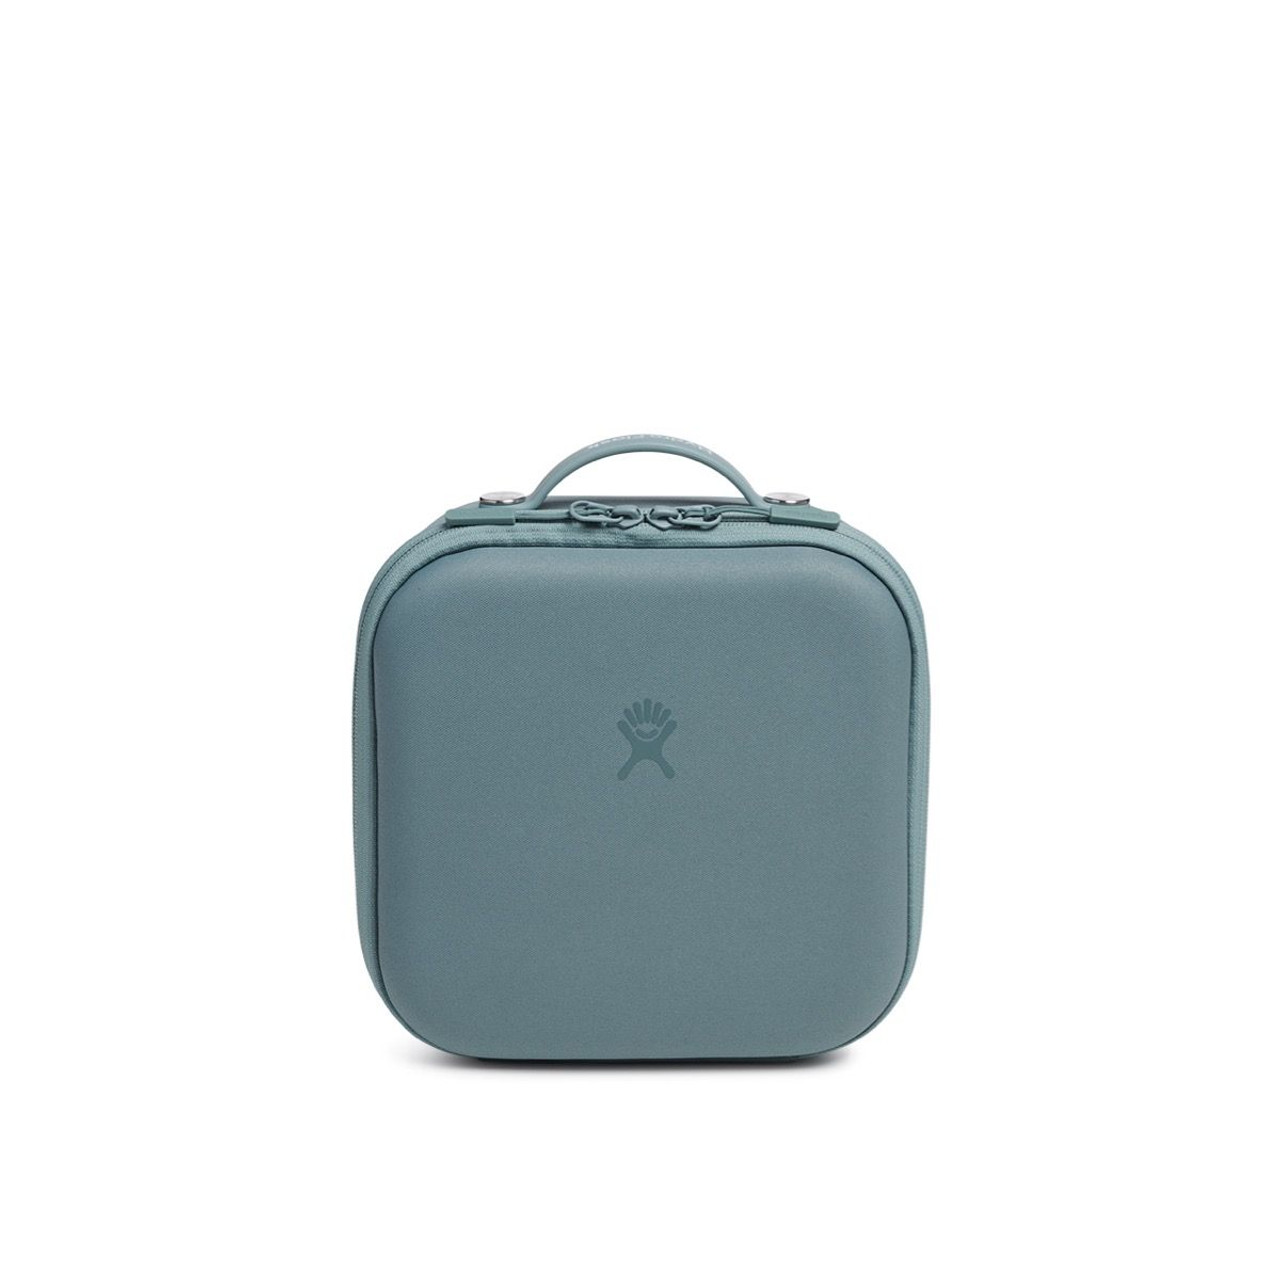 Hydro Flask Kids' Small Insulated Lunch Box